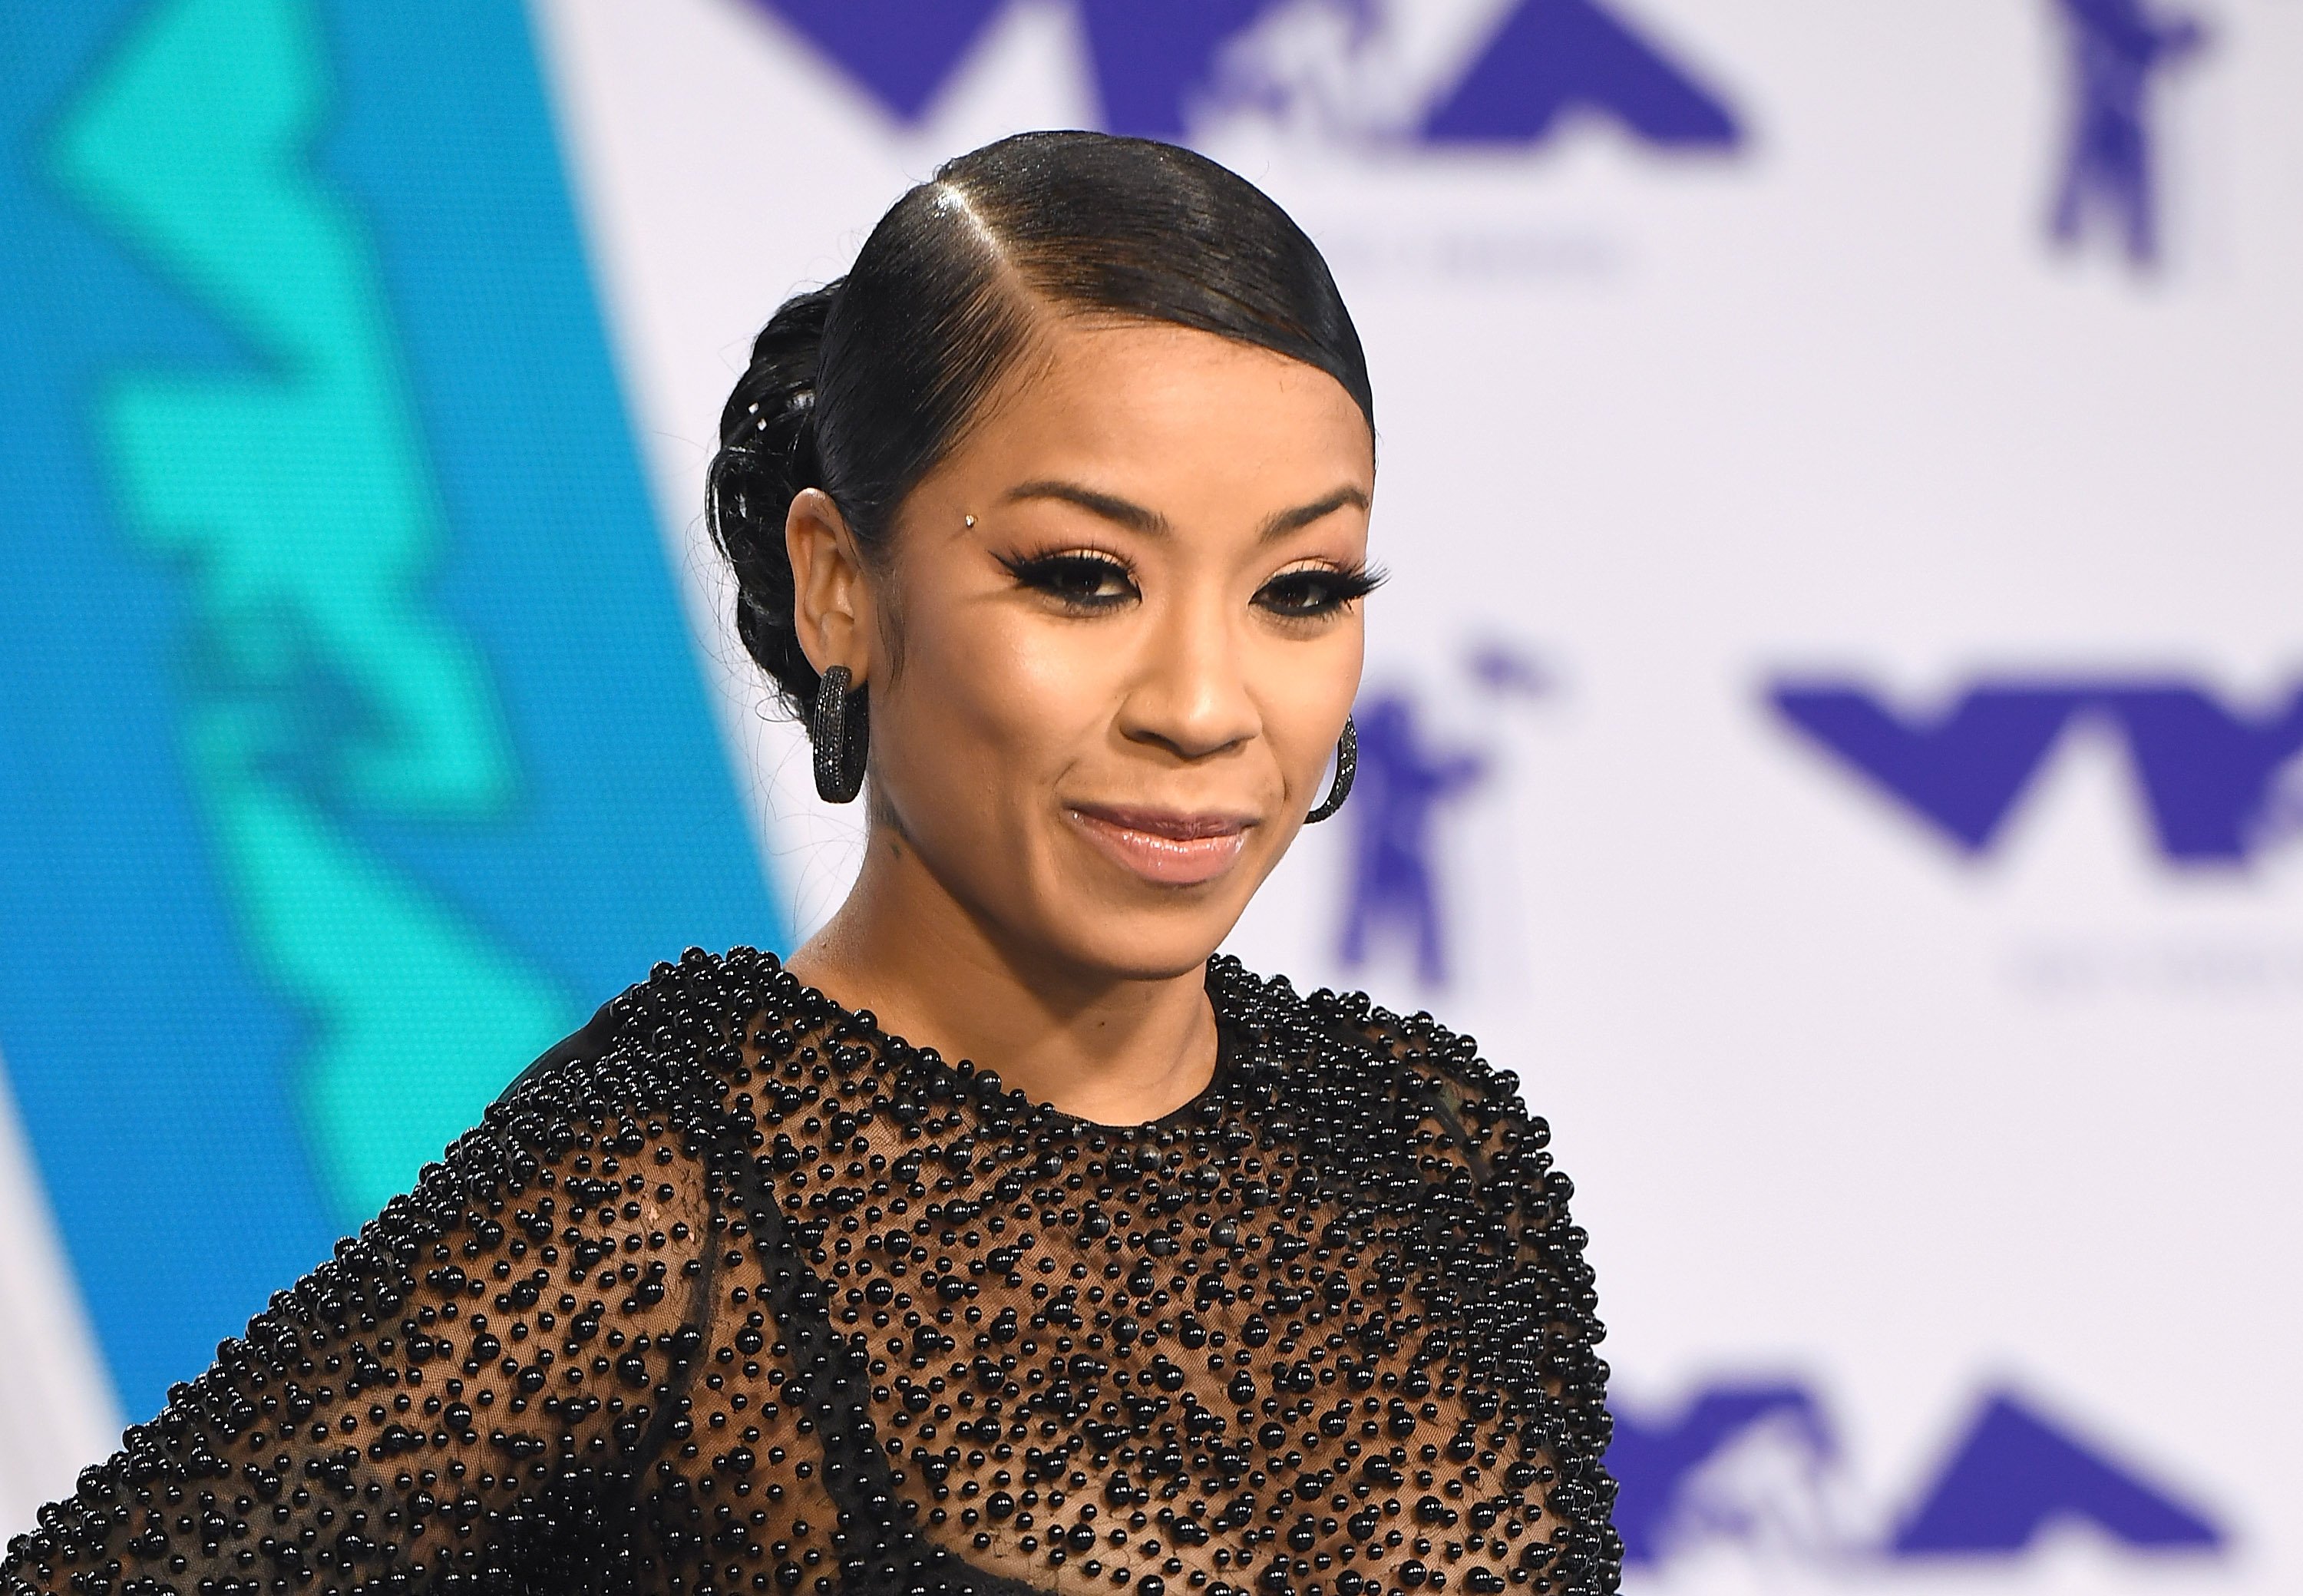 Keyshia Cole at the 2017 MTV VMAs at The Forum on August 27, 2017 in Inglewood, California.|Source: Getty Images